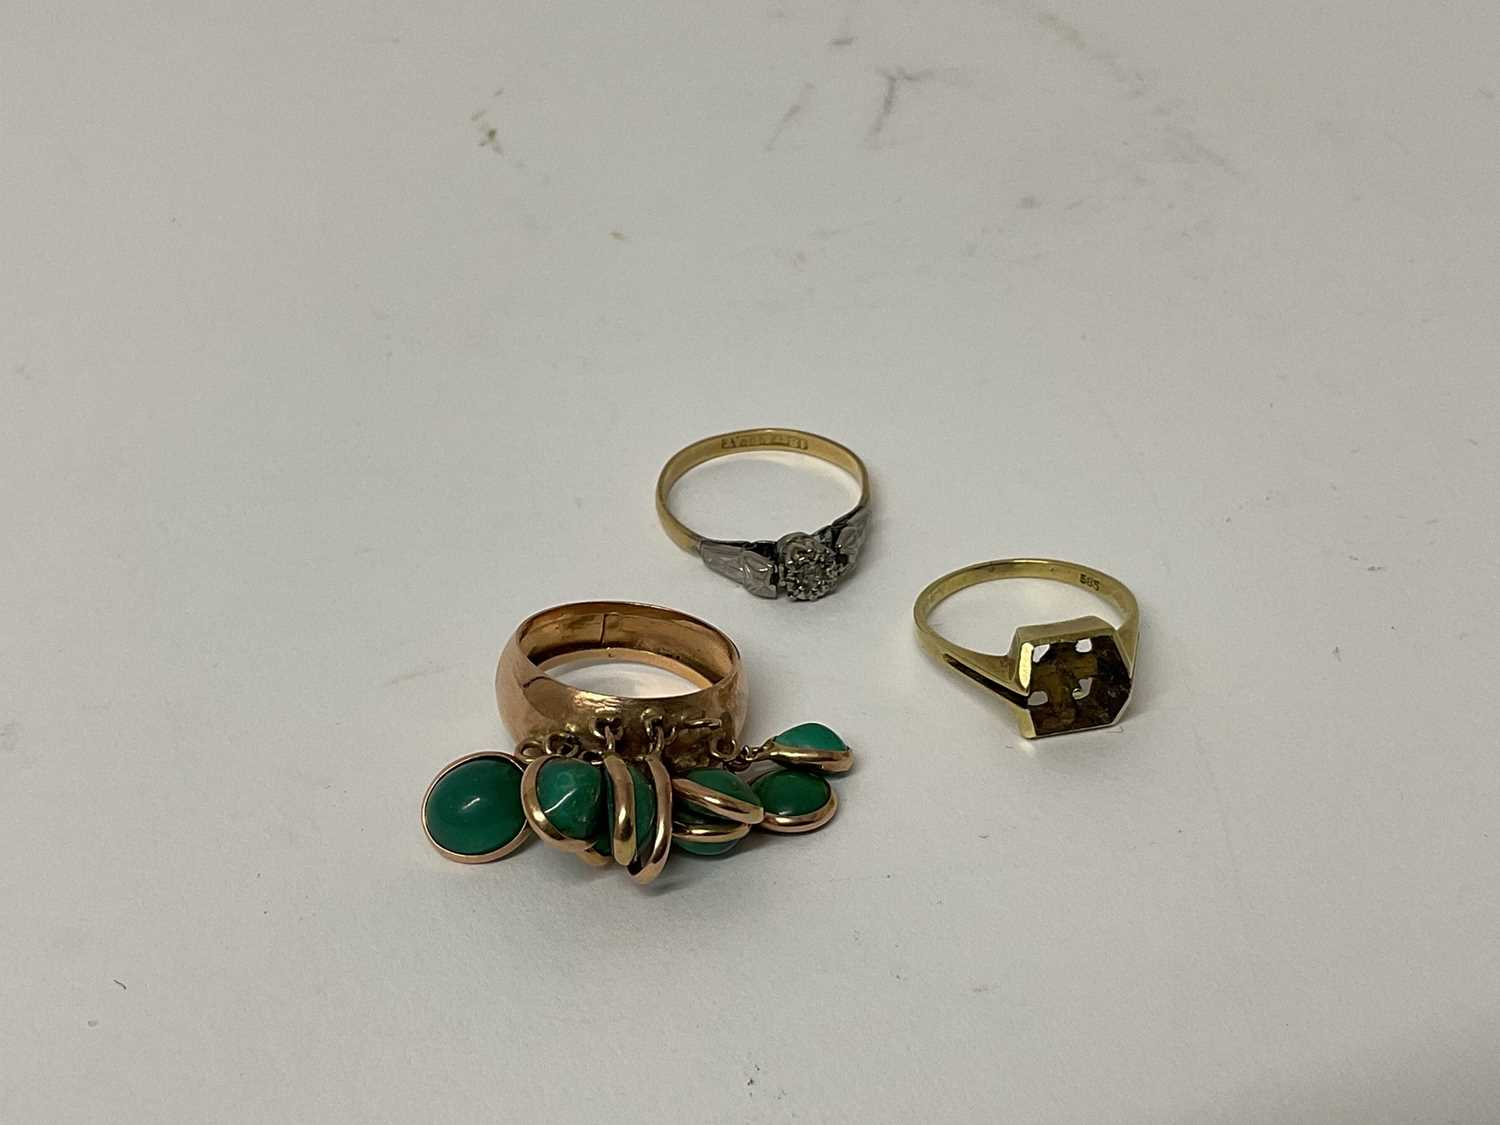 Lot 87 - 18ct gold and platinum diamond single stone ring, ring size P 1/2, 14ct gold ring, marked 585, ring size M and a yellow metal dress ring set with green stones, ring size L 1/2 (3)